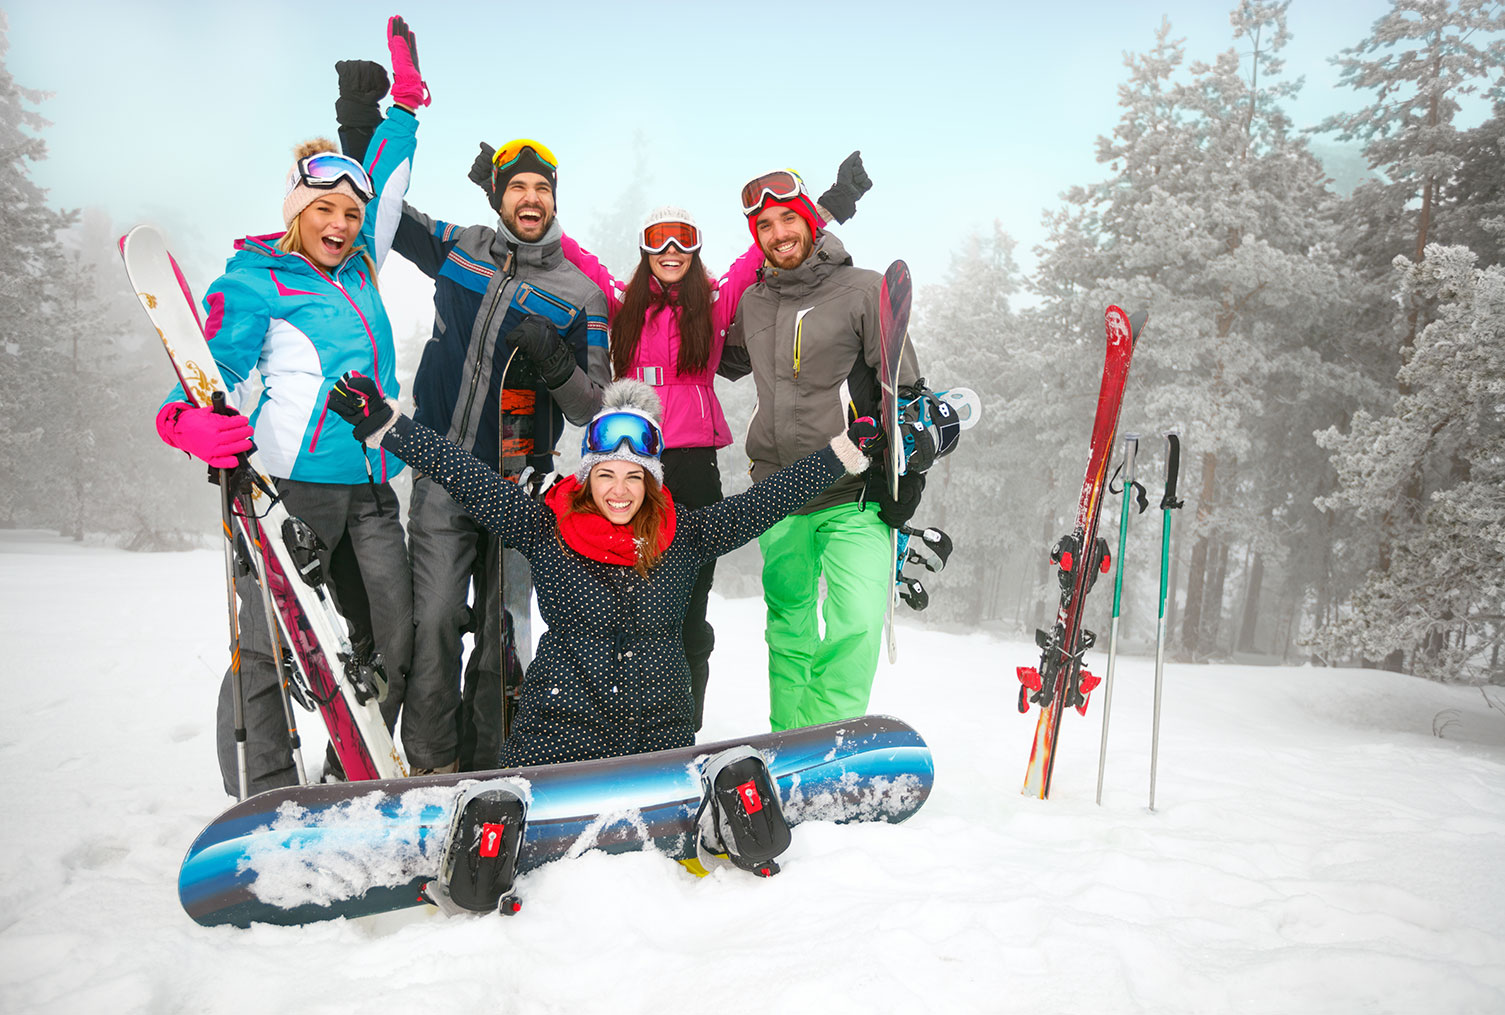 Skis in Vancouver | Snowboarding in Vancouver | Skis Rental in Vancouver | Snowboard Rental in Vancouver | Snow Clothes in Vancouver | Snow Clothes Rentals in Vancouver